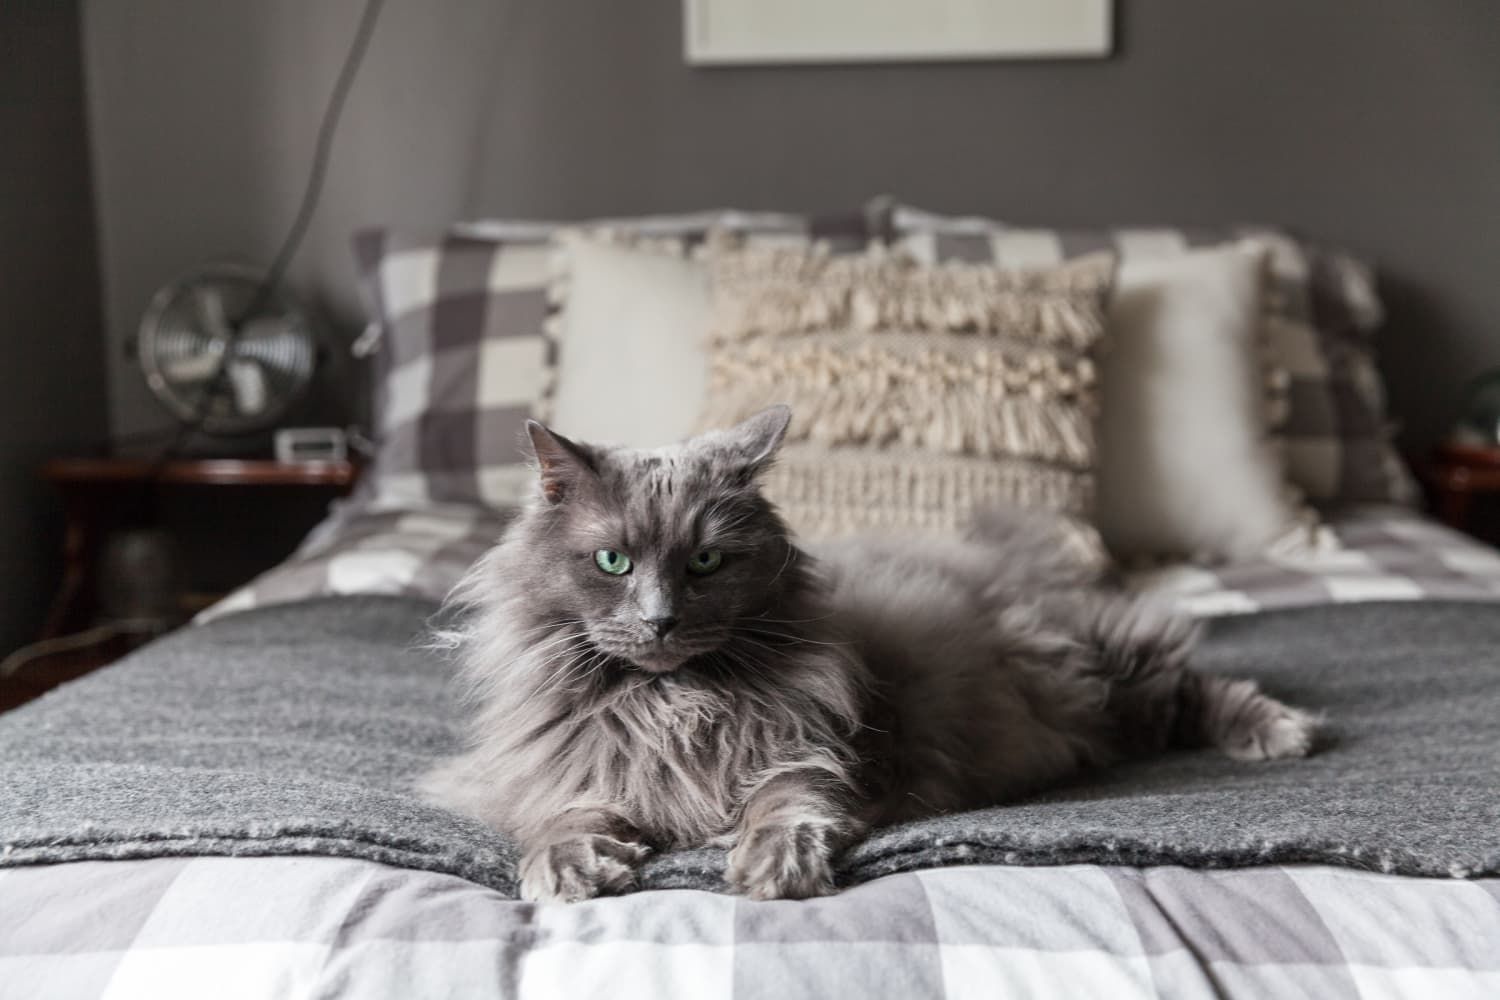 When To Put A Cat To Sleep With Hyperthyroidism